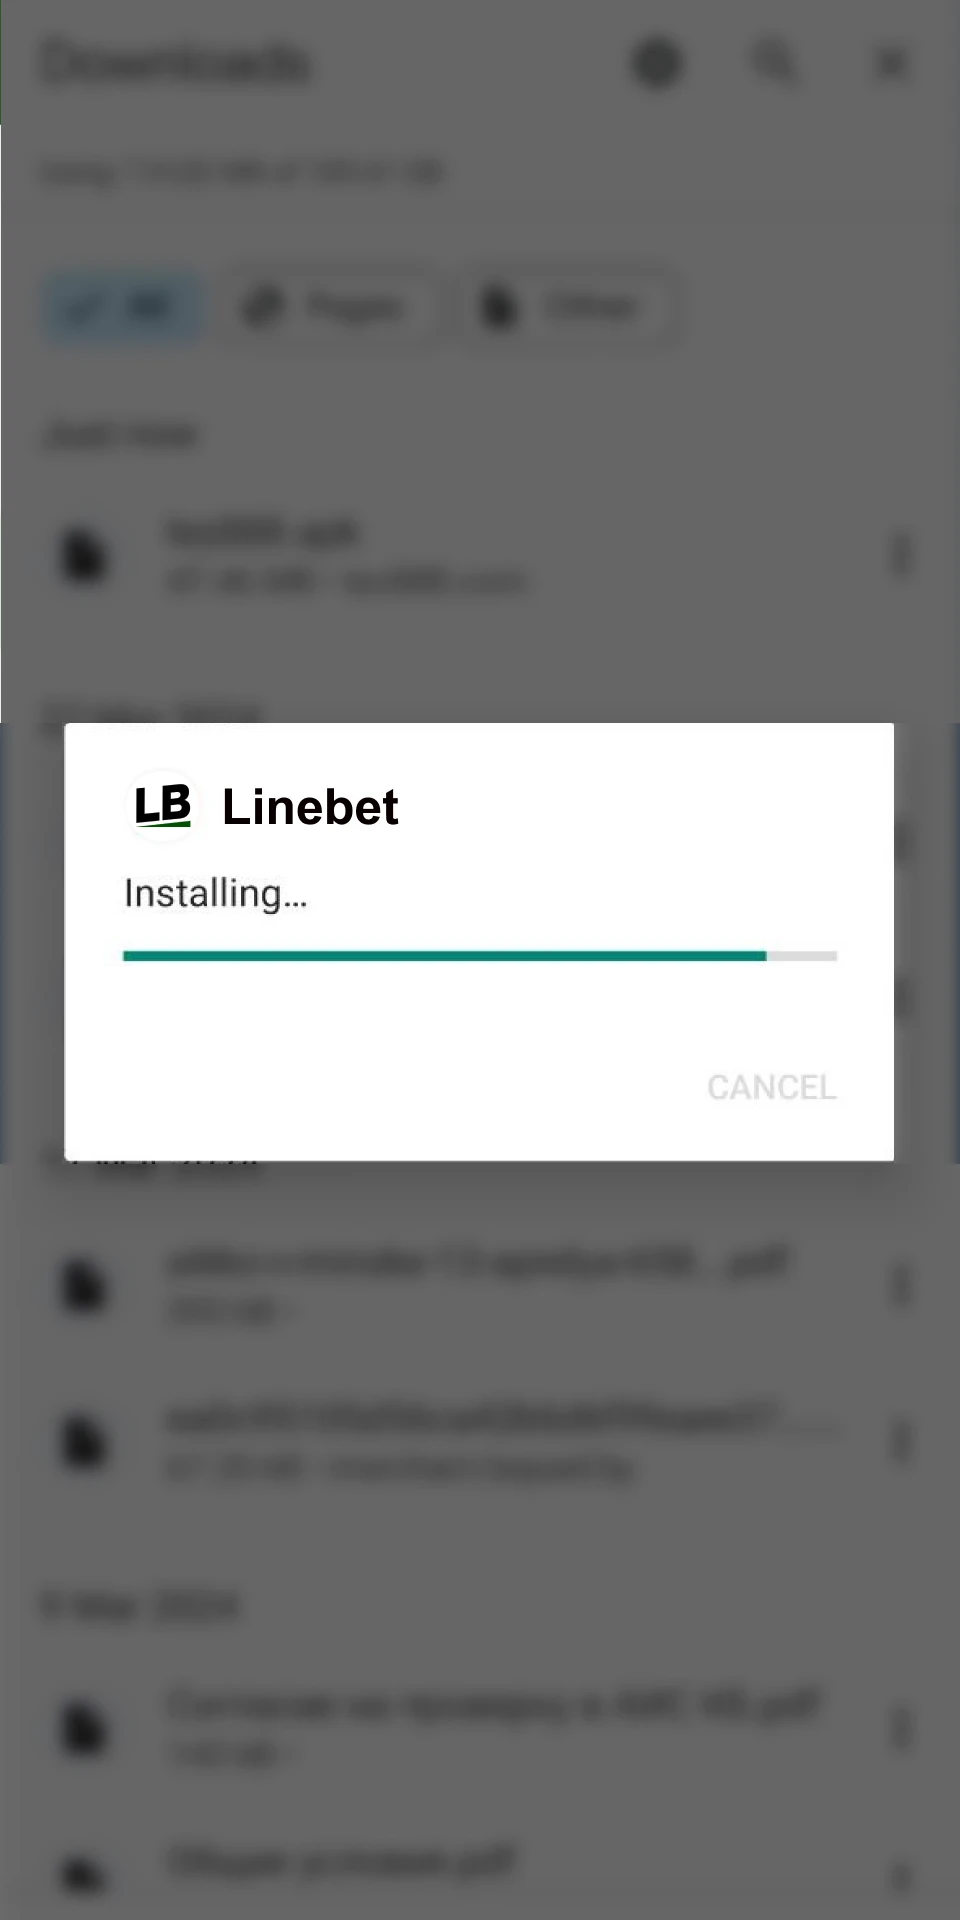 Install the Linebet app on your Android device in seconds.